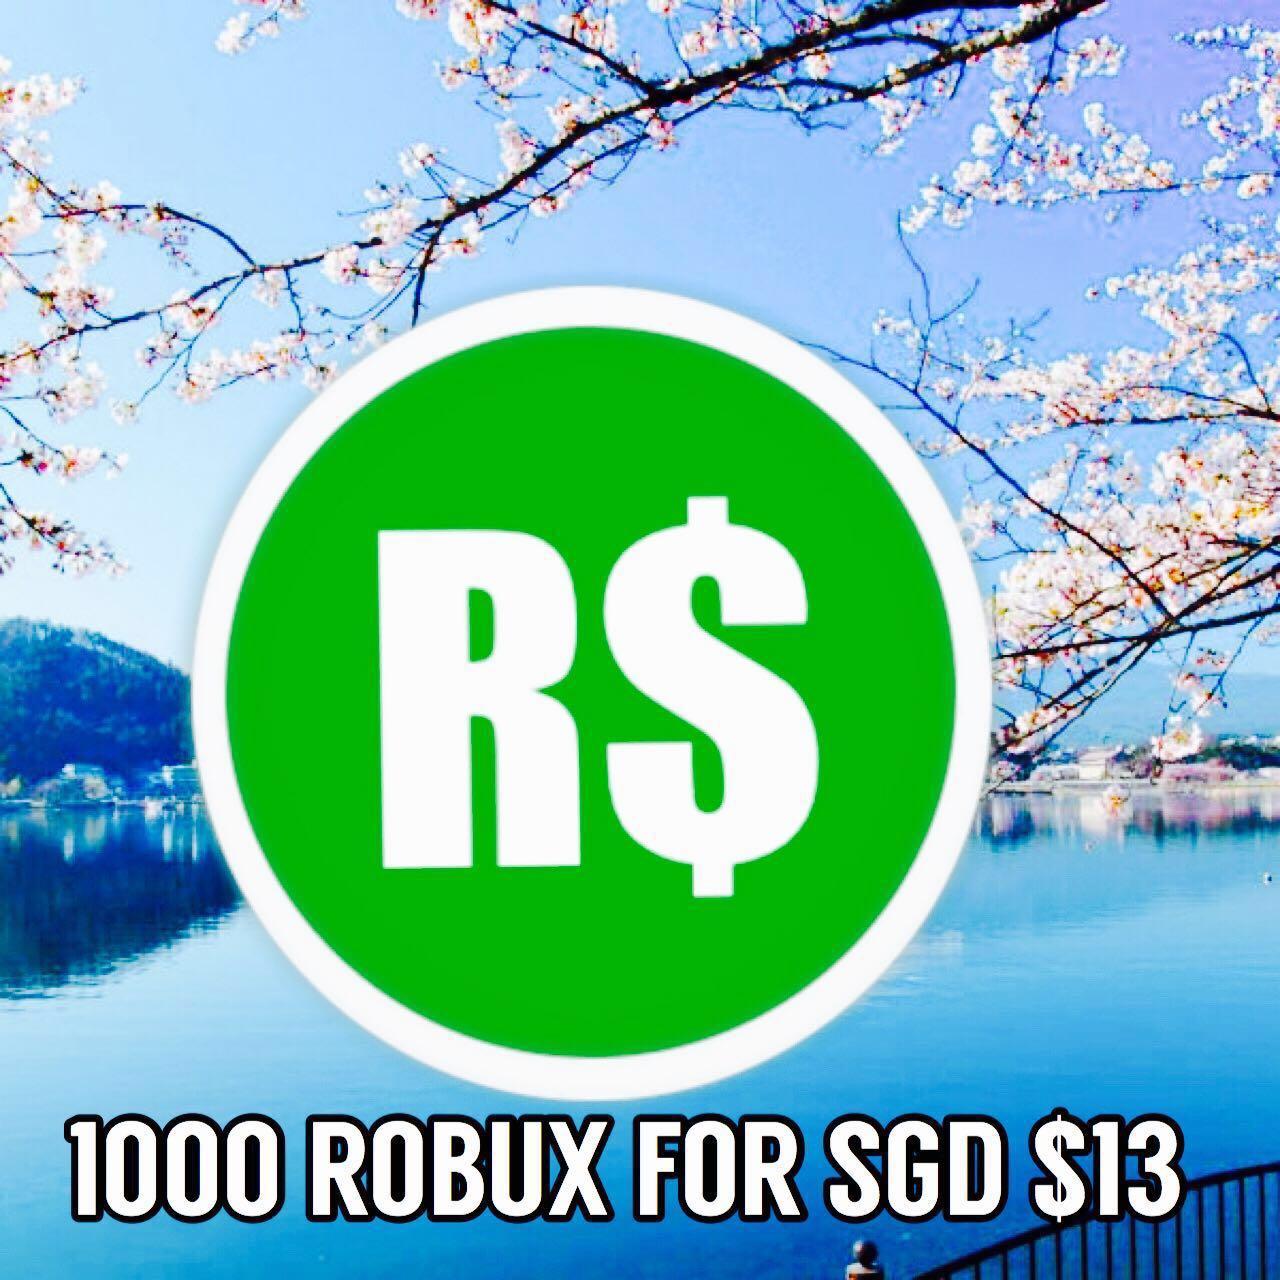 Robux Sgd 13 Singapore Based Toys Games Video Gaming Video Games On Carousell - robux 6 others carousell singapore